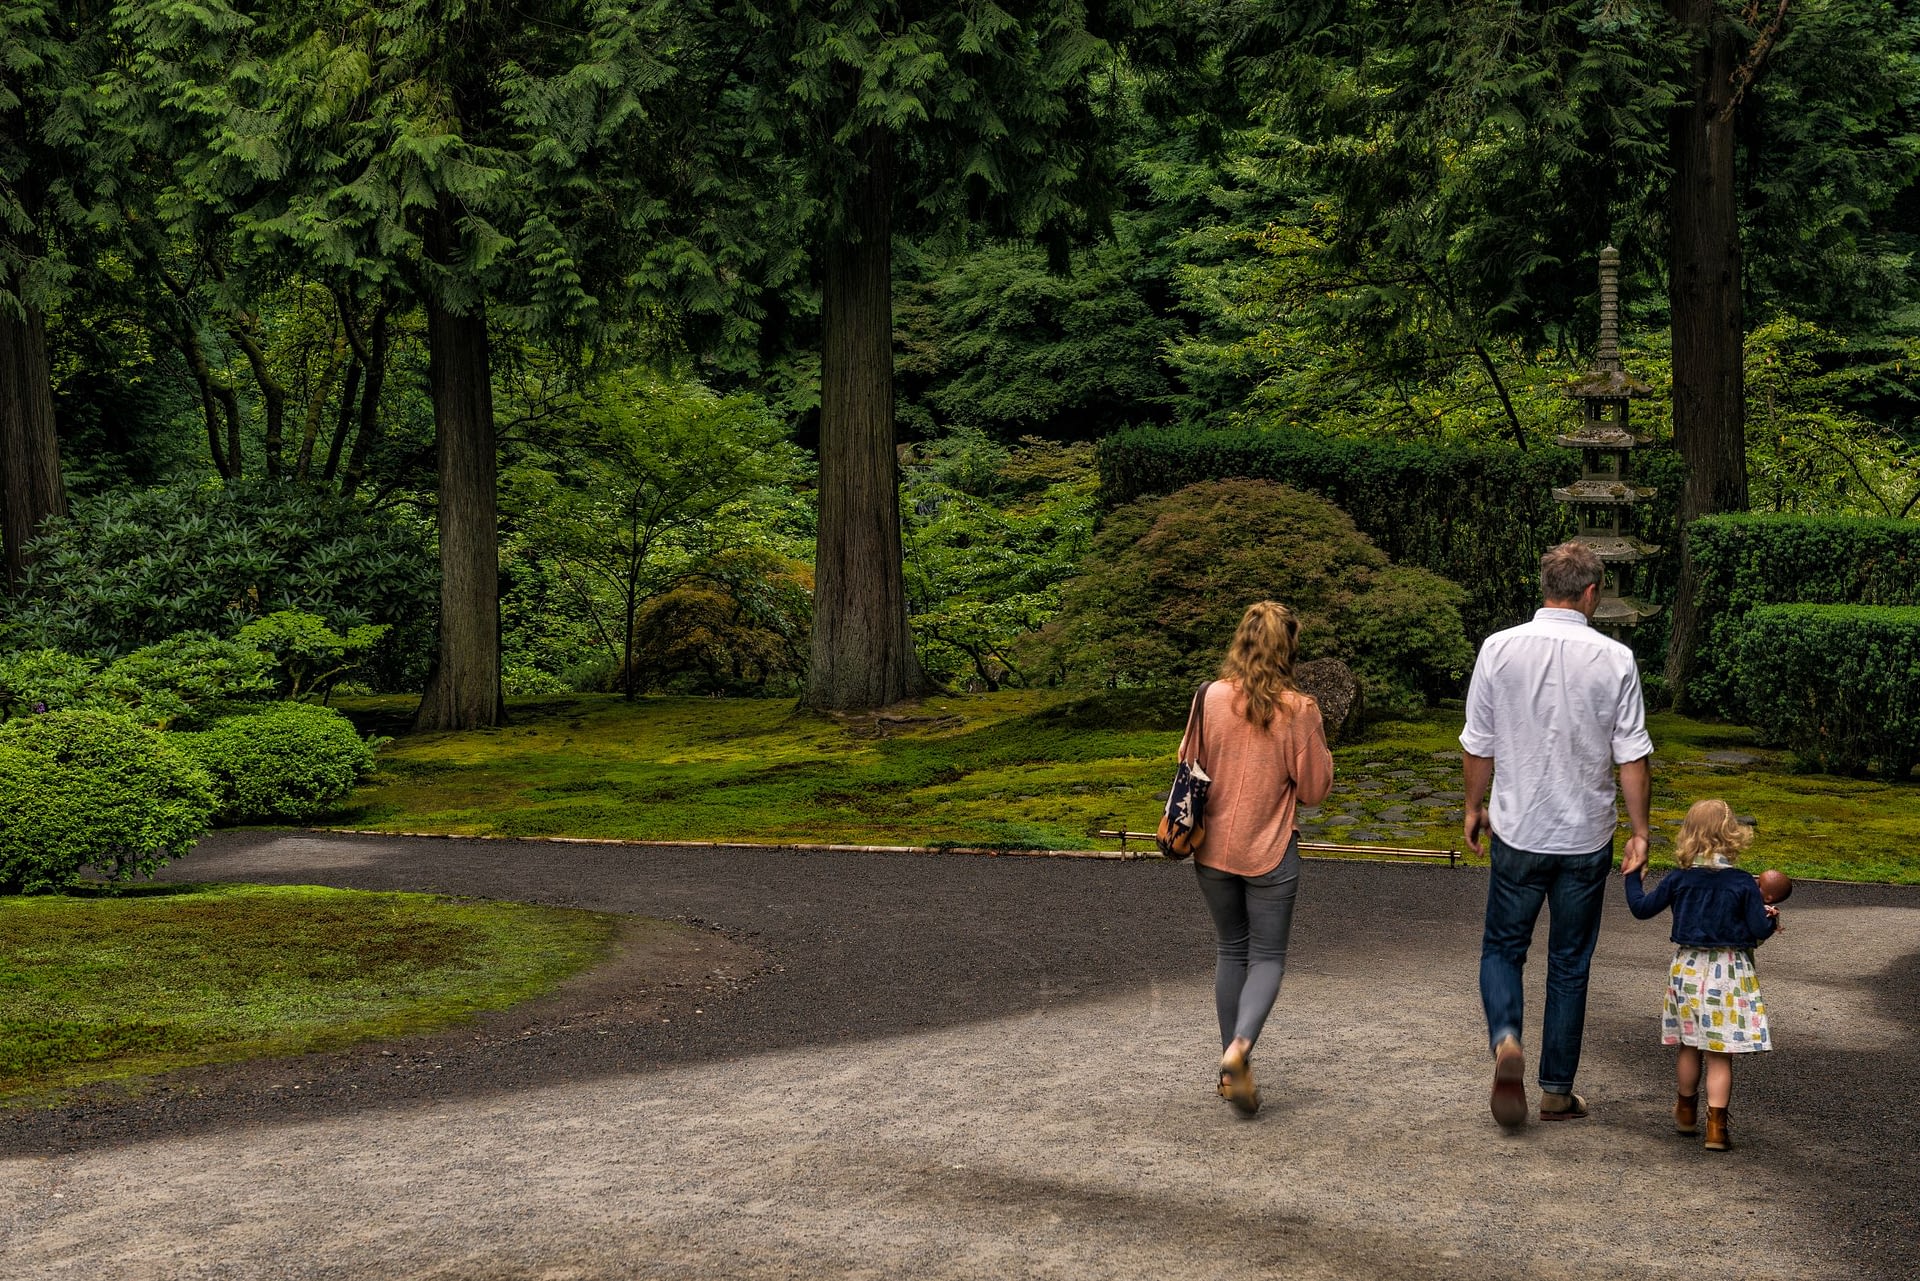 A family consisting of a mother, father, and toddler walks through the Portland Japanese Garden